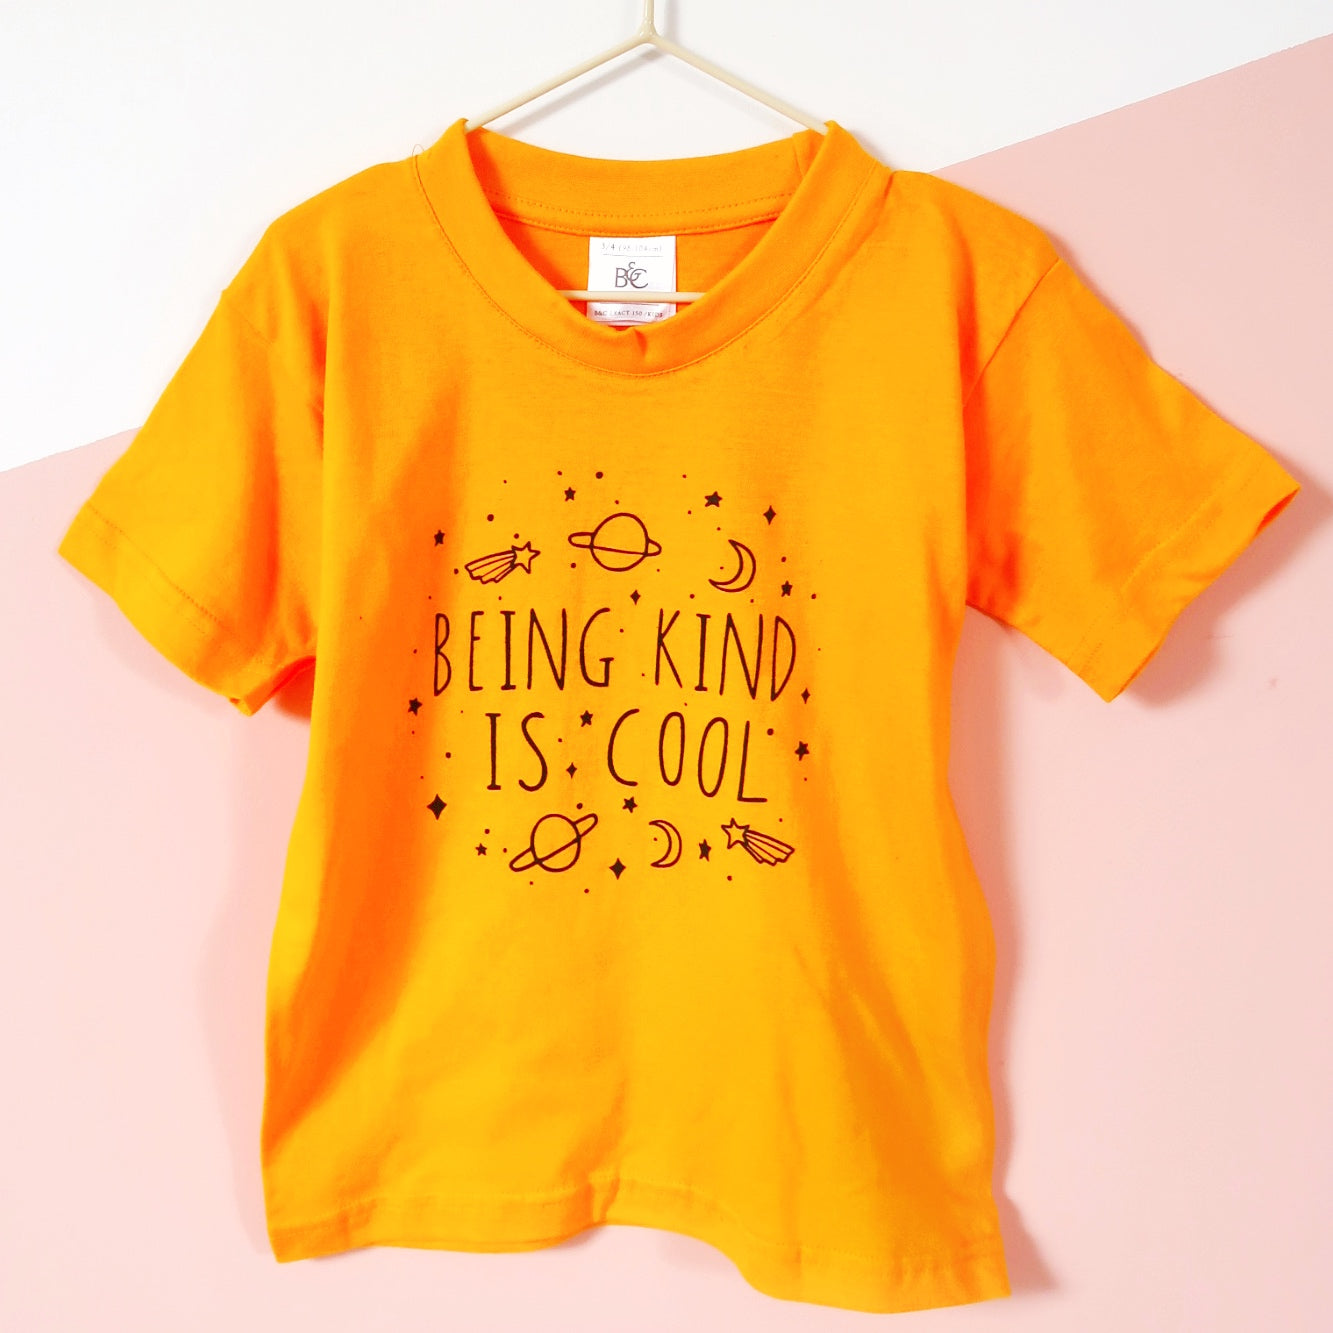 kids being kind is cool t-shirt - yellow